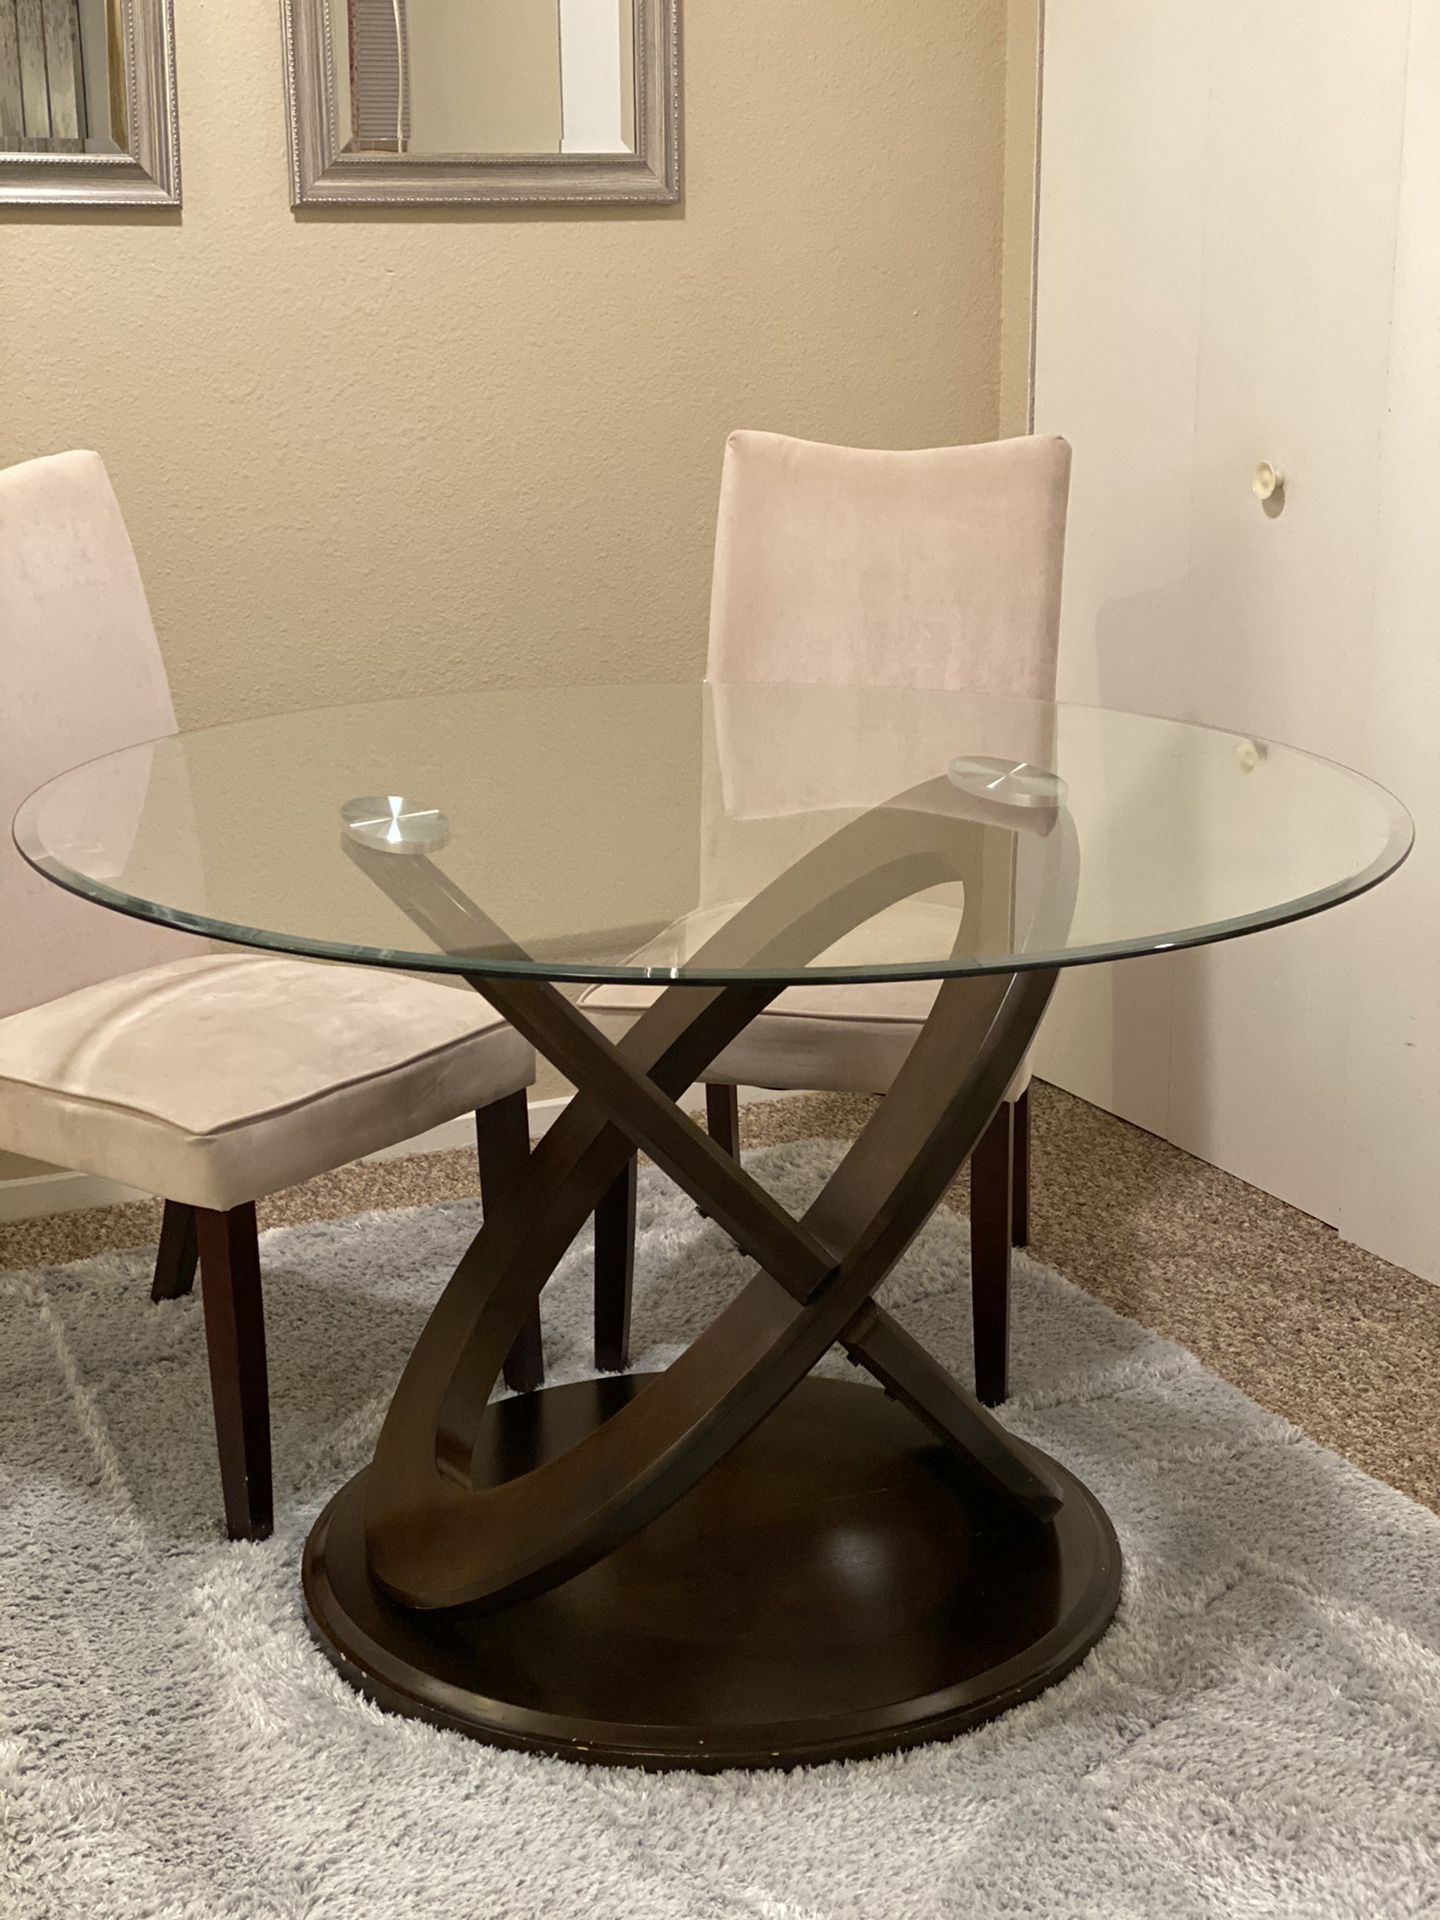 Glass top modern dining table set 4 chairs